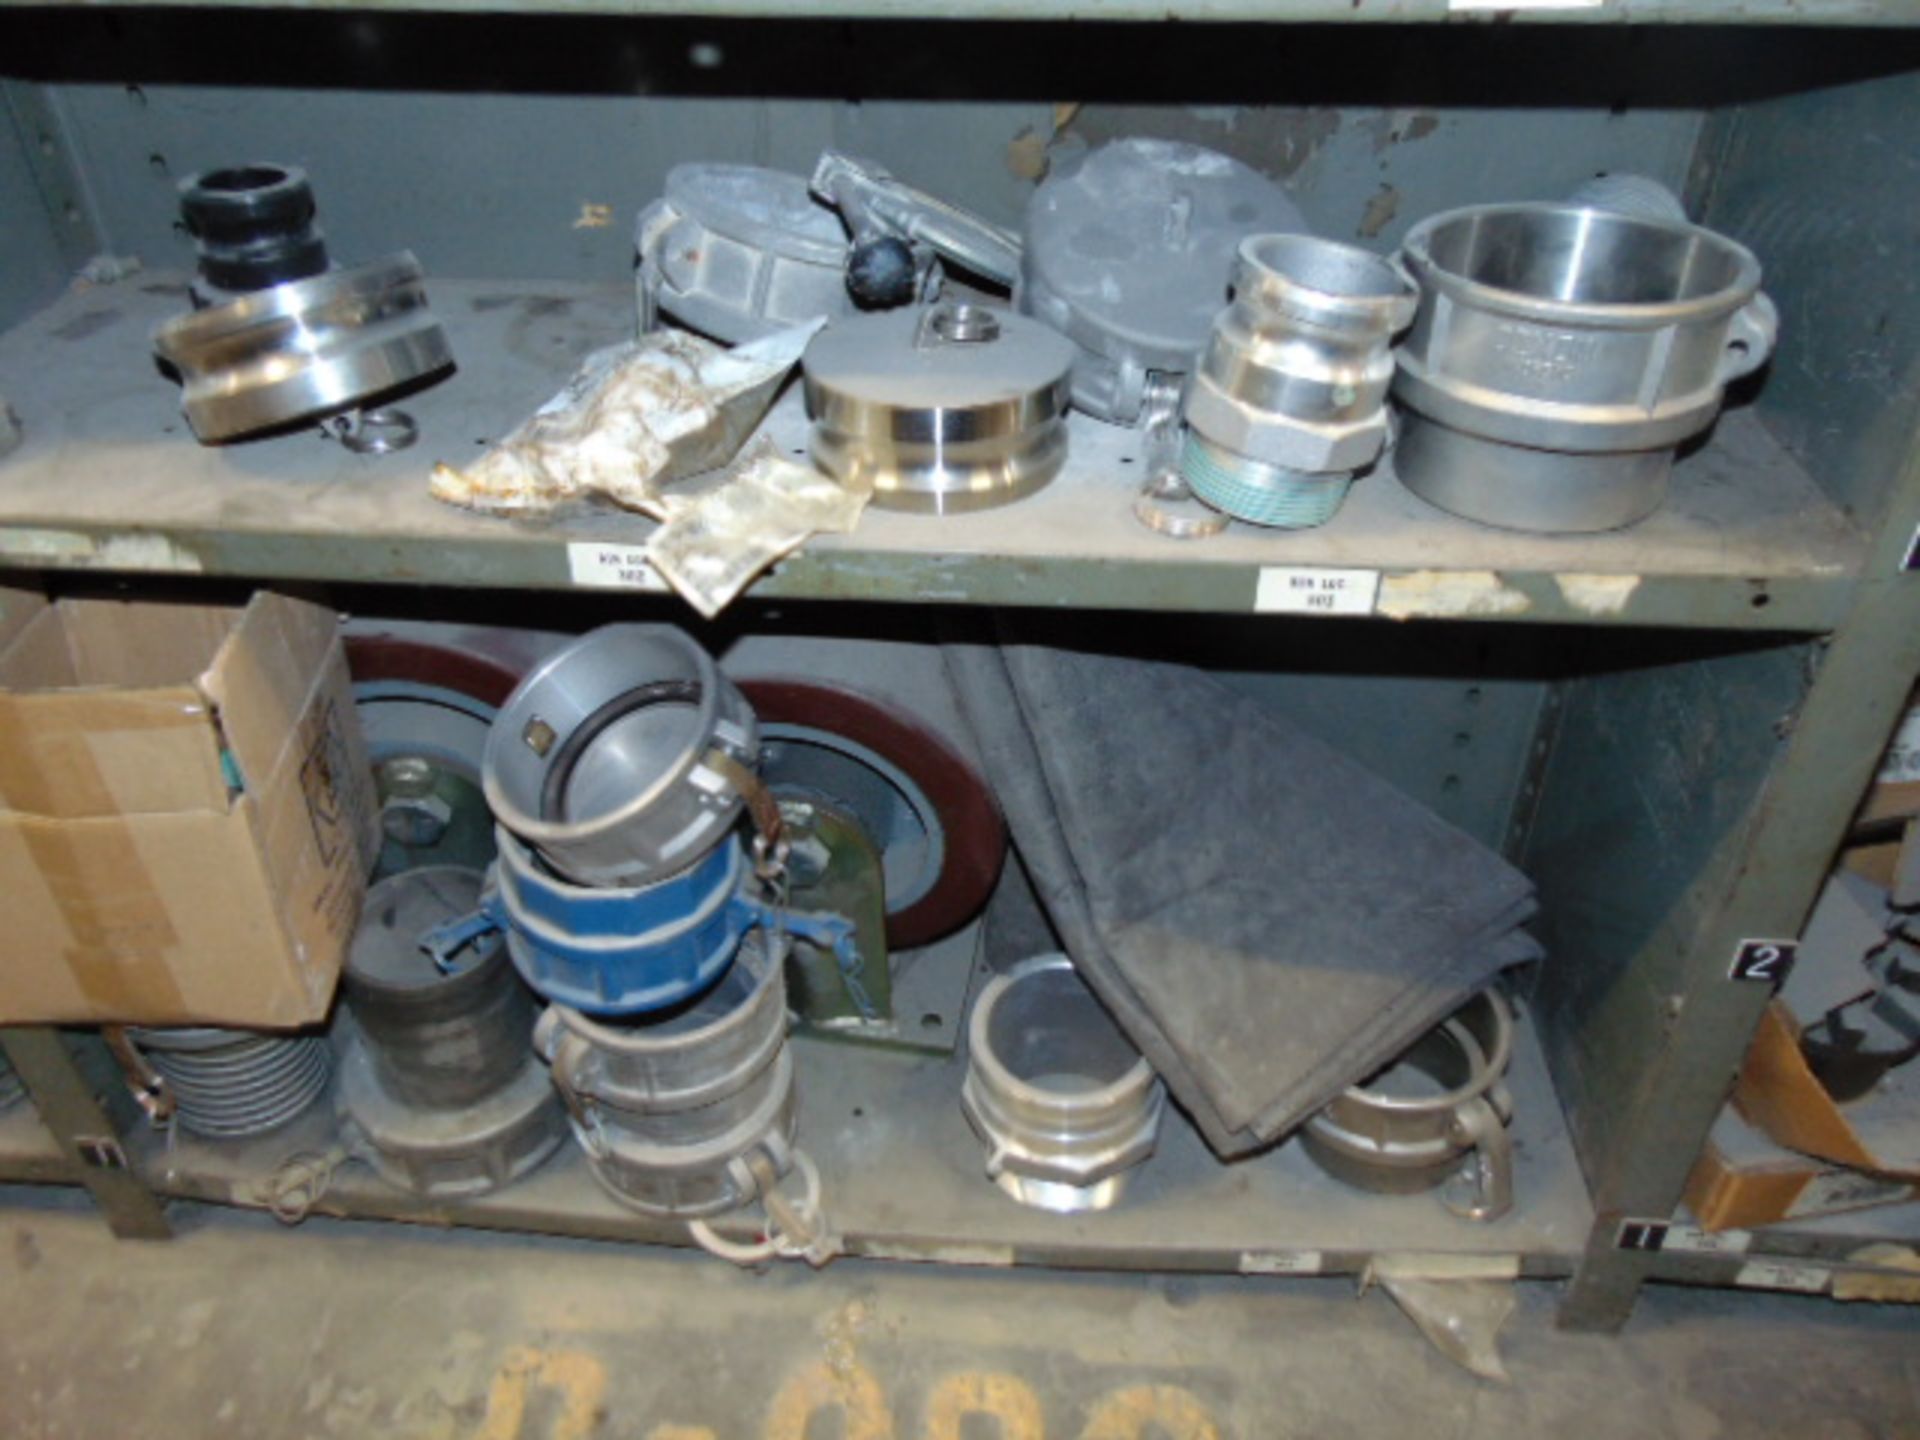 LOT CONSISTING OF: pipe seals, roller chain, gaskets, hose couplings, nuts & bolts, roller - Image 4 of 12